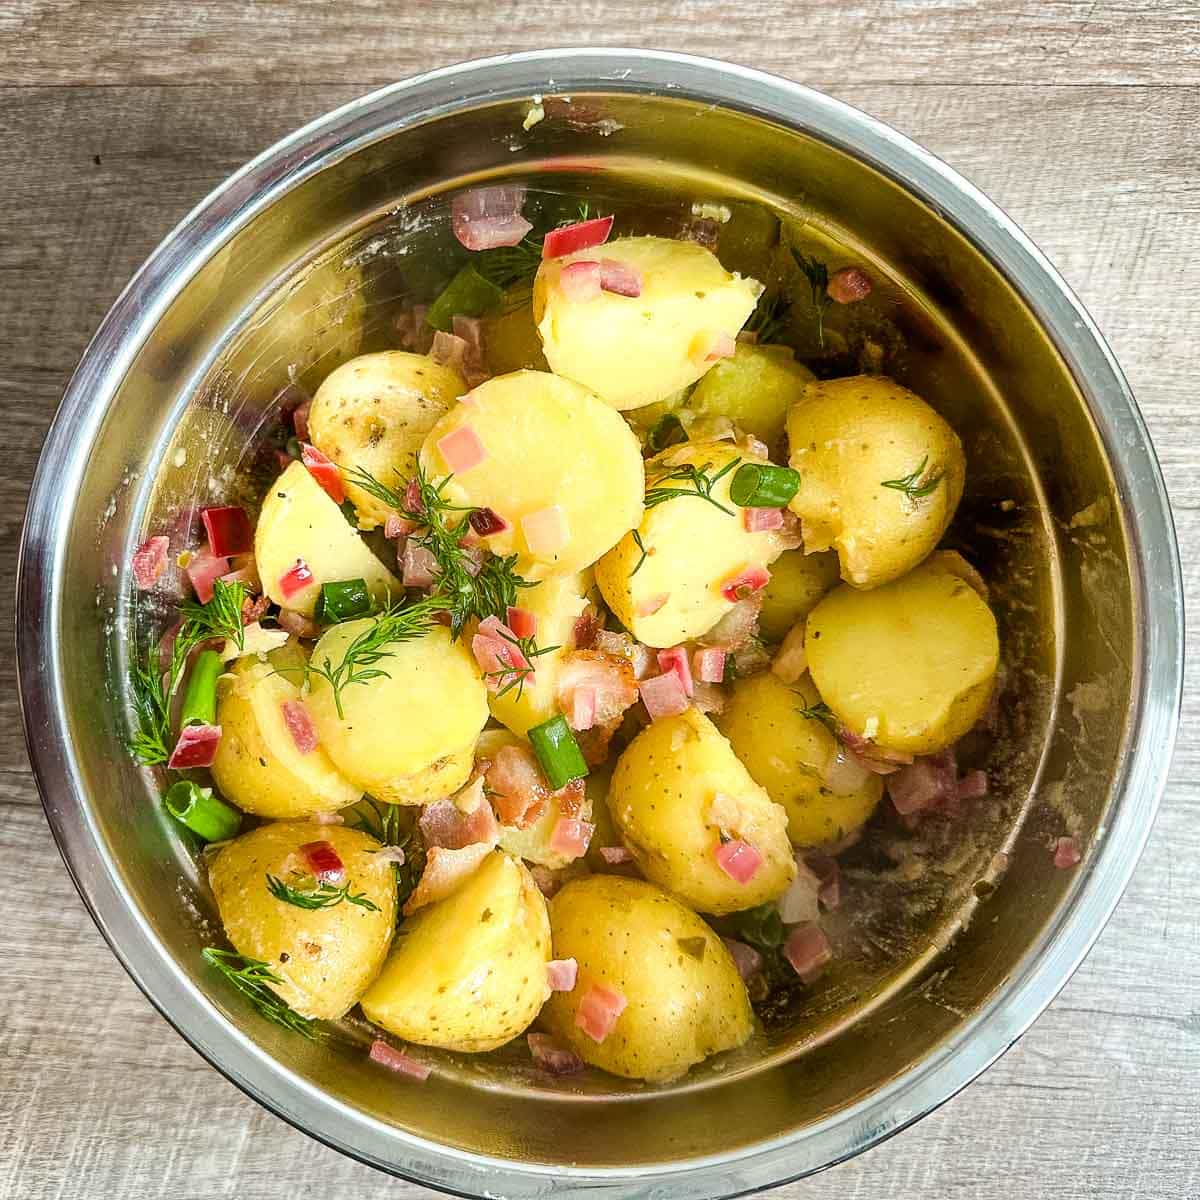 finished bavarian potato salad in a stainless steel bowl.